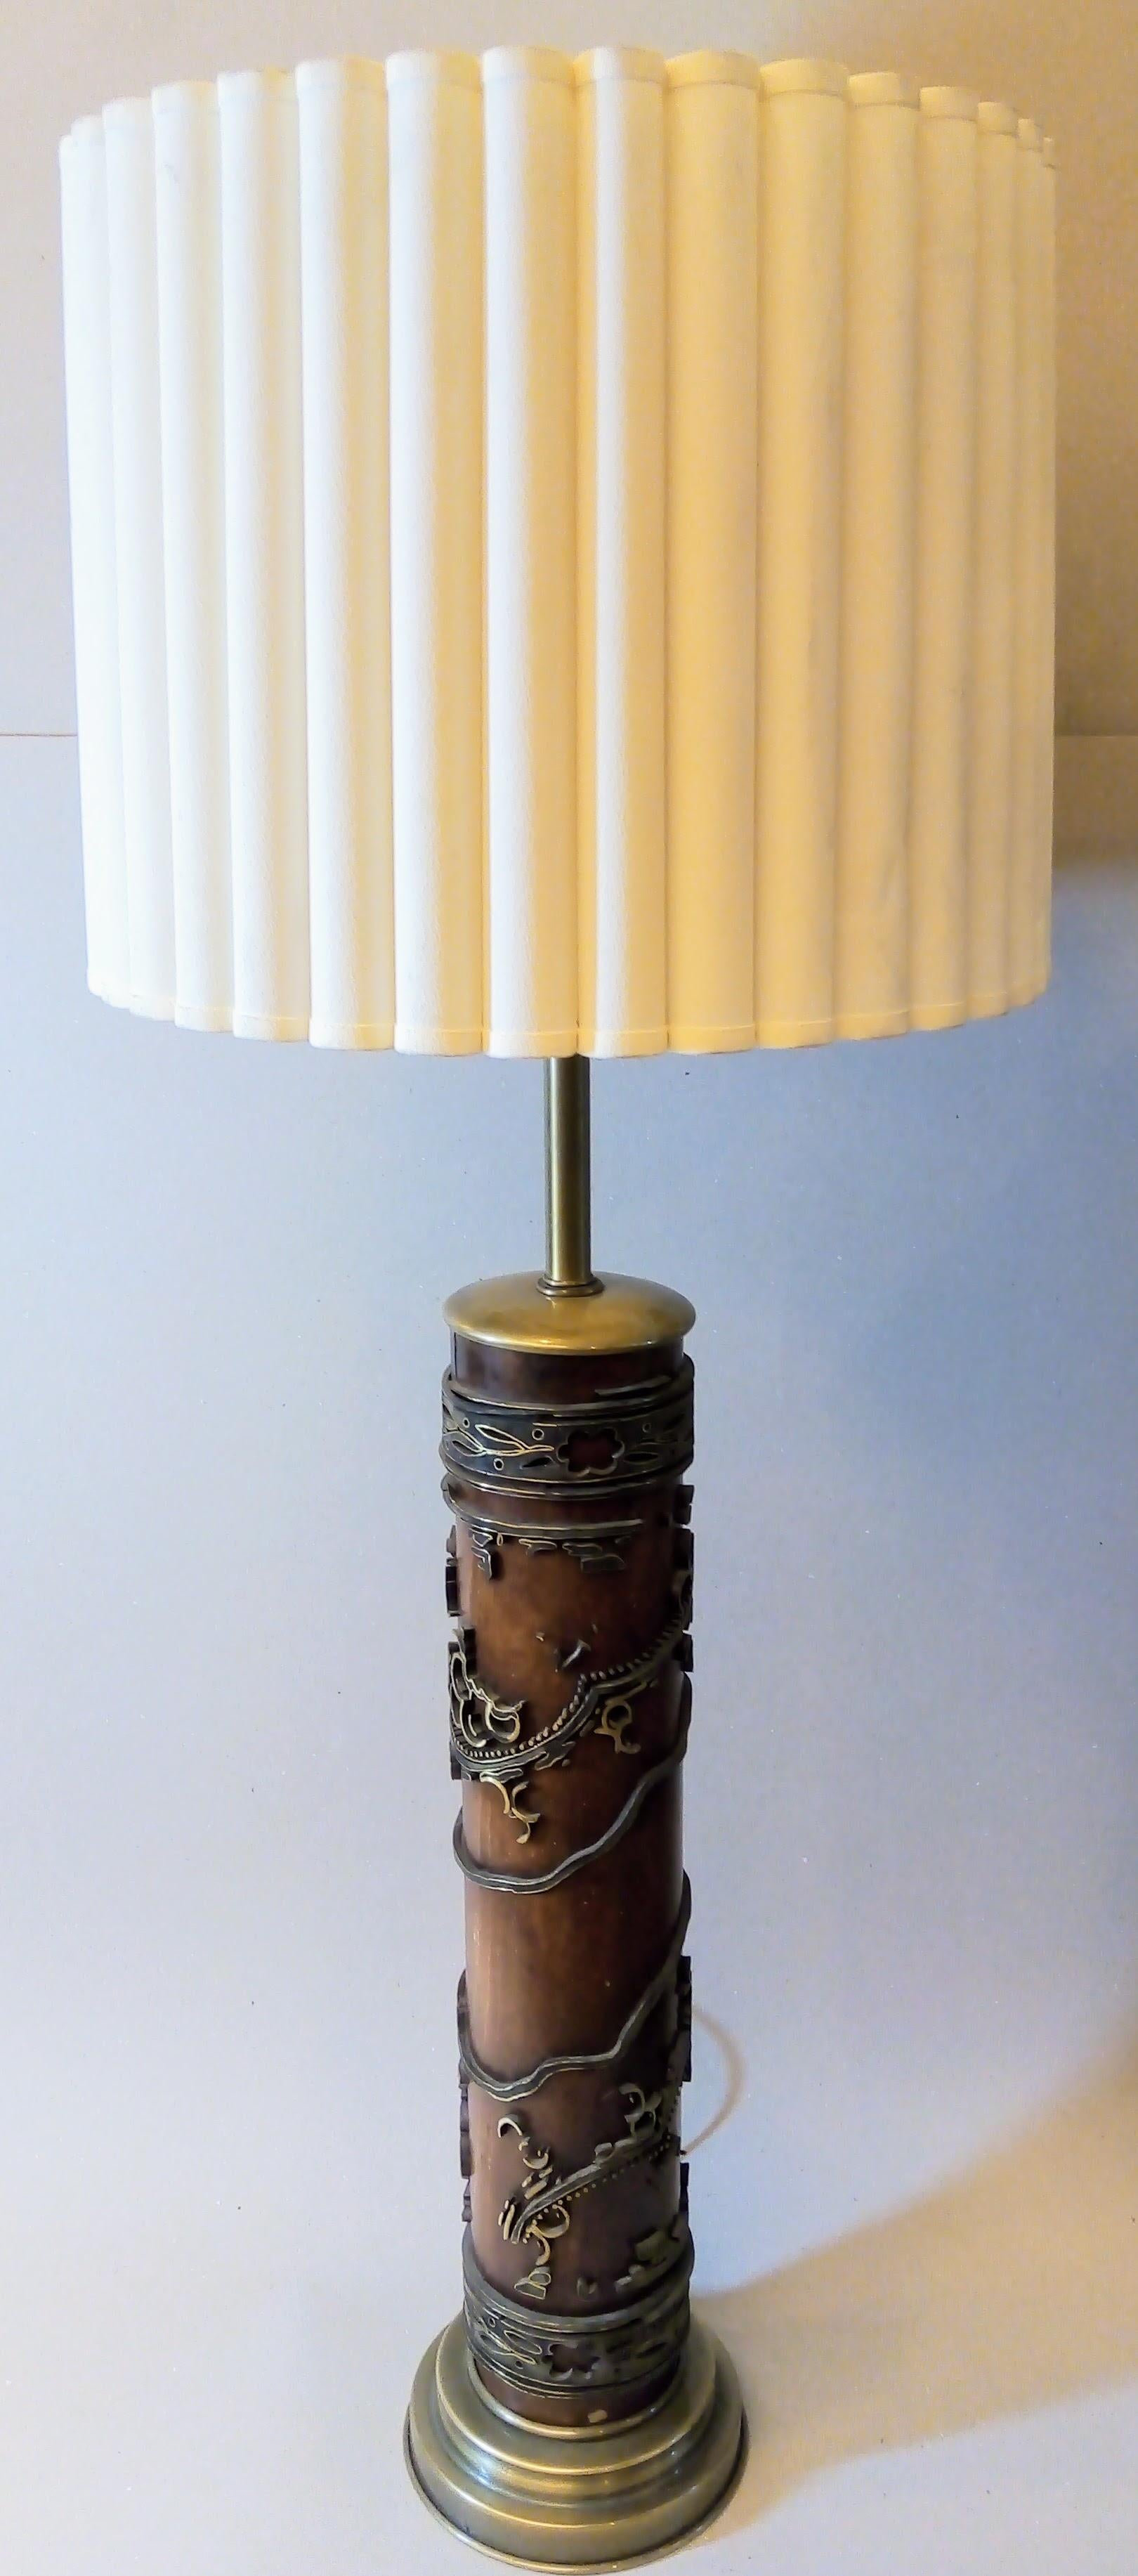 Set of 4 Striking Wallpaper Printing Roller Lamps from the 60's 3